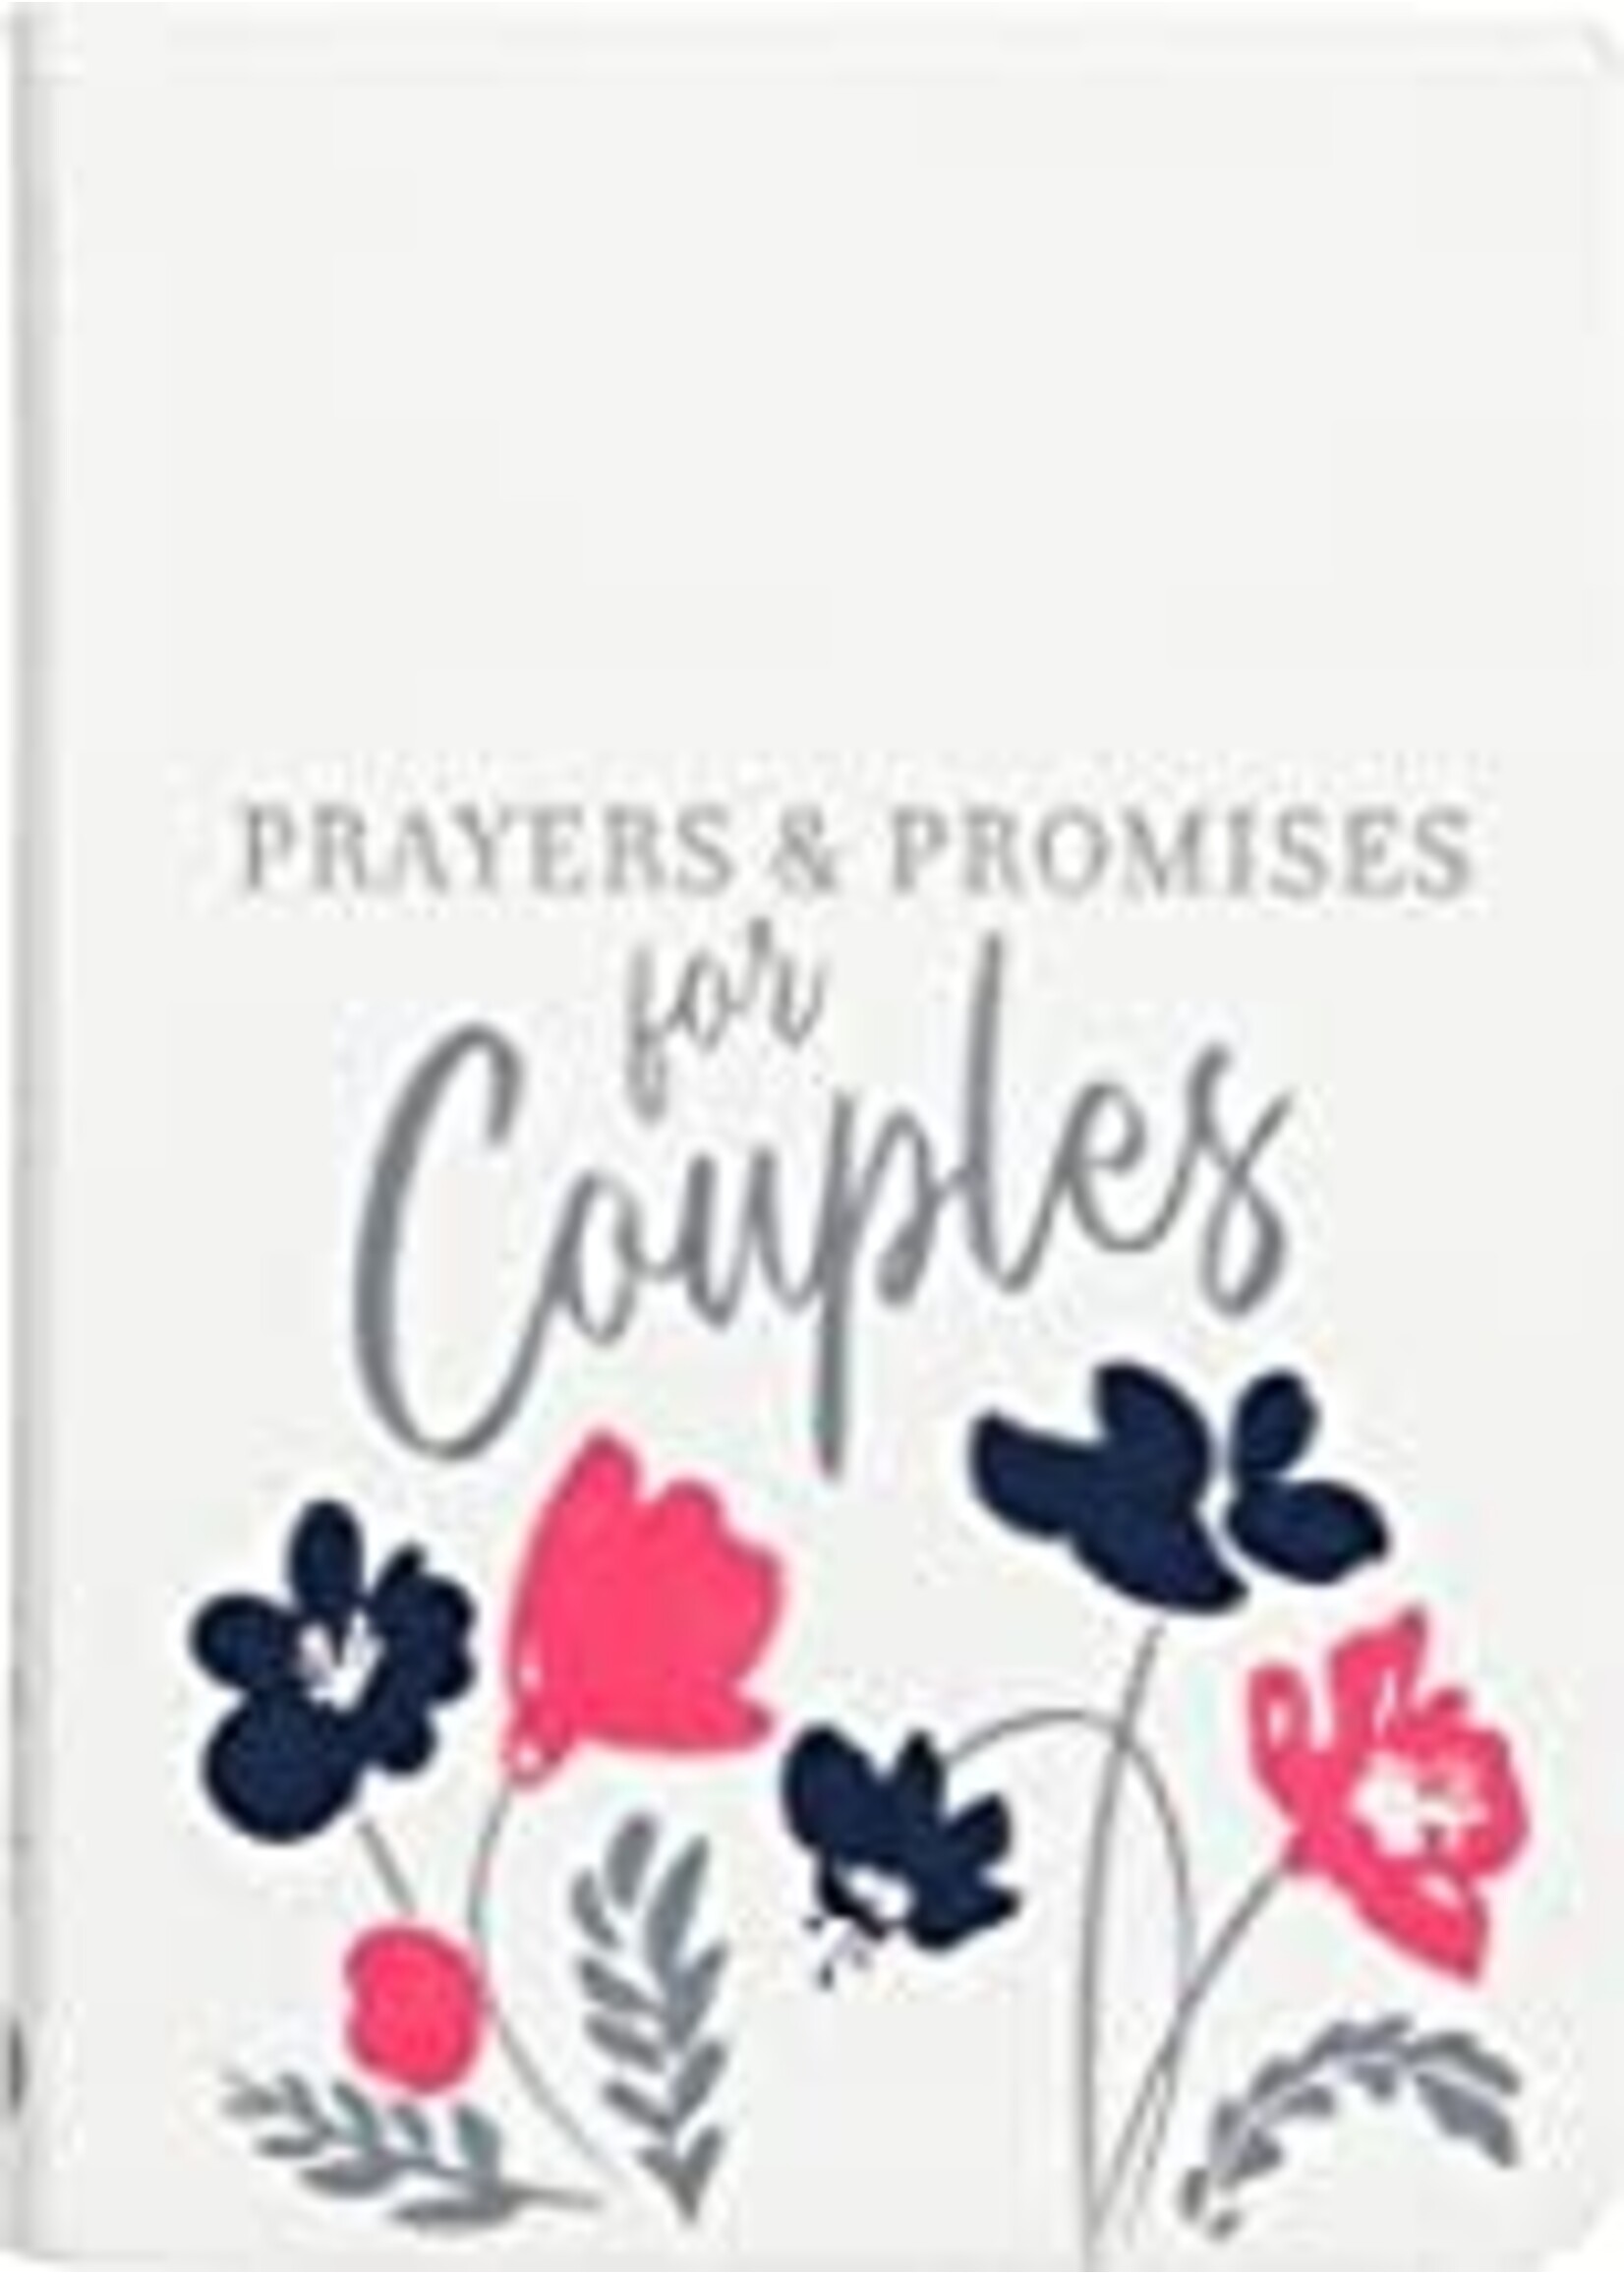 PRAYERS AND PROMISES FOR COUPLES